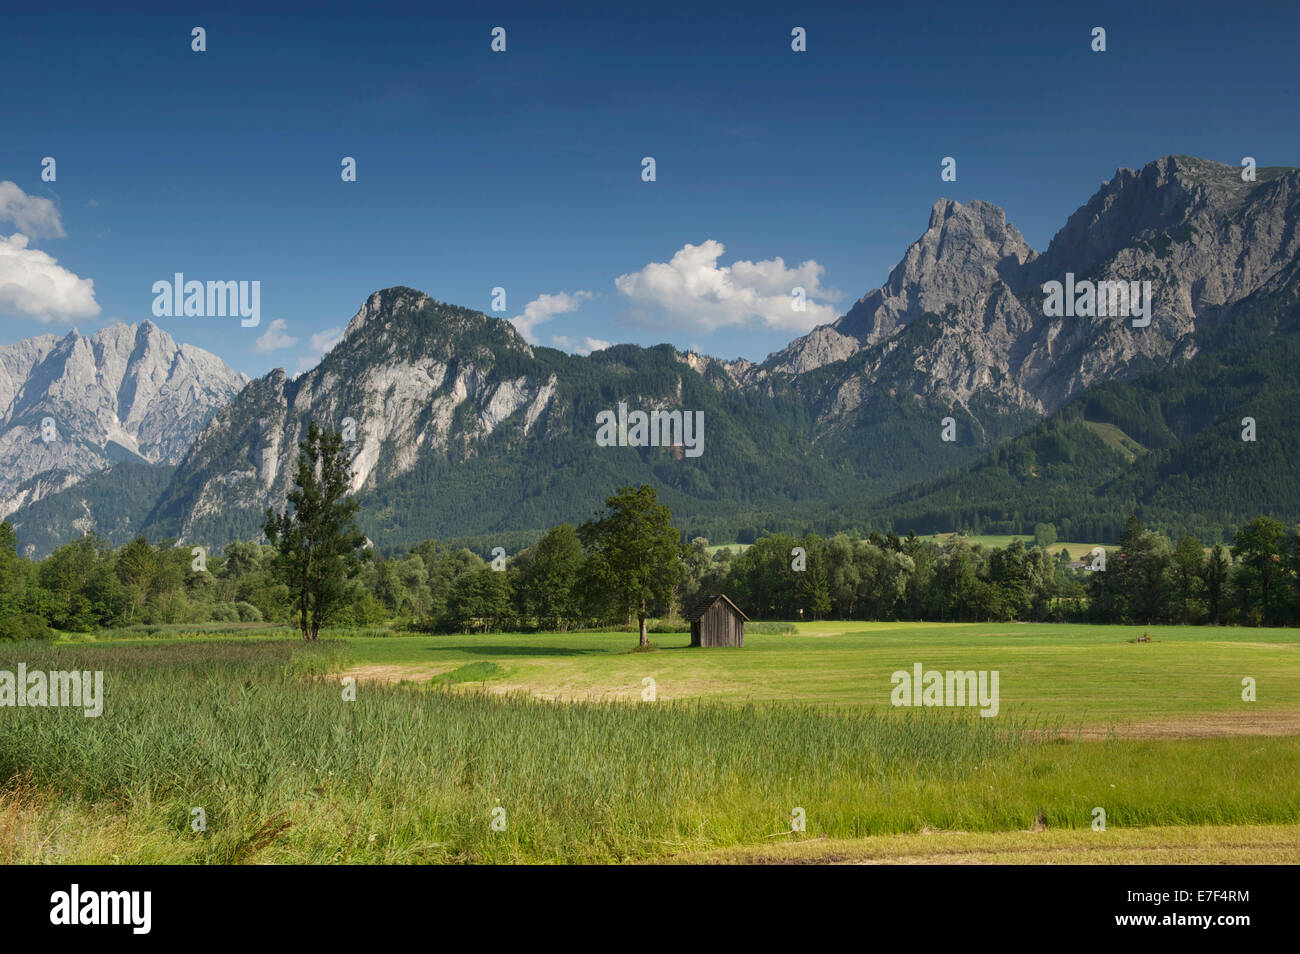 View from Weng in the Gesäuse range across the Enns valley onto the mountains, Gesäuse National Park, Styria, Austria Stock Photo